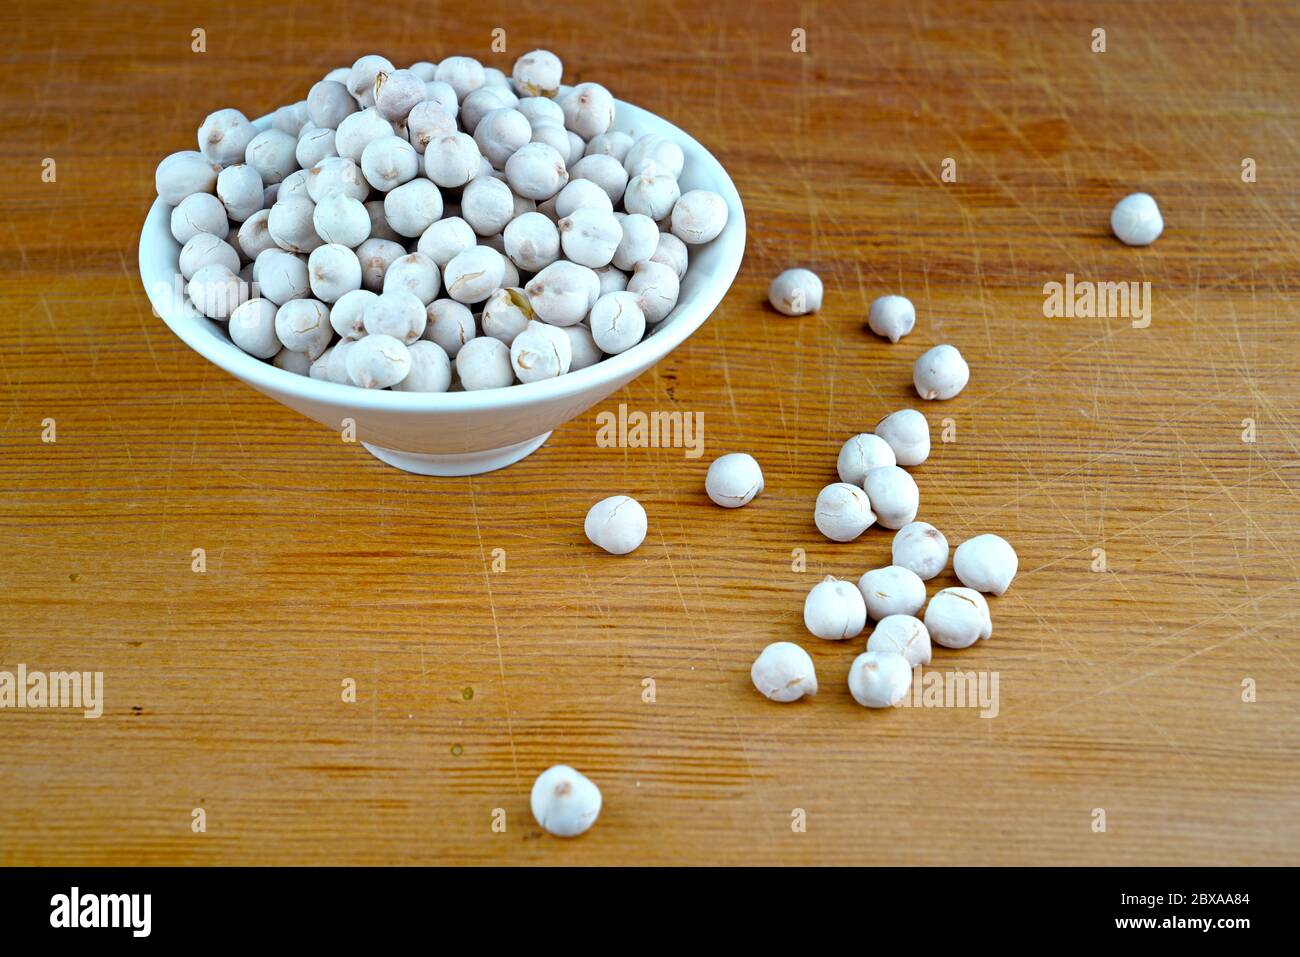 Plateful of Organic White chickpeas and Spilled White chickpeas on Wooden Background Stock Photo